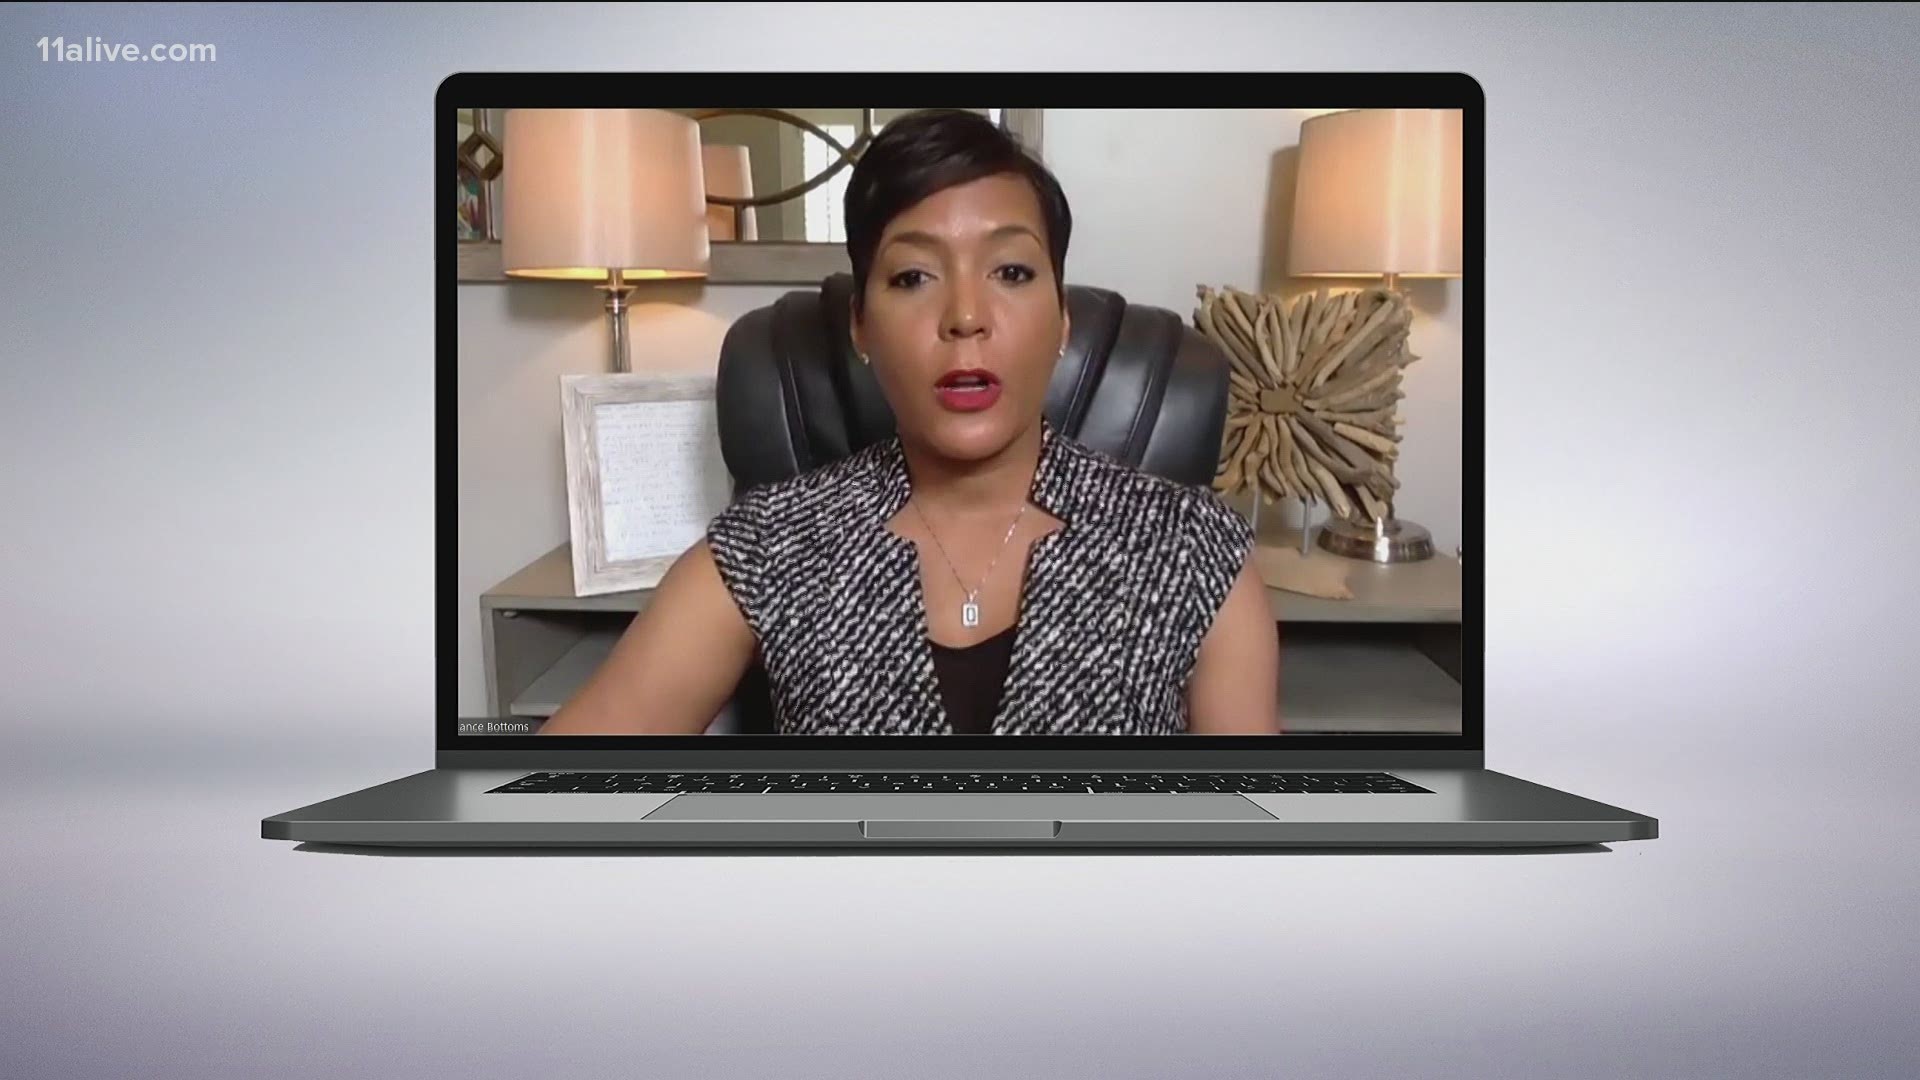 Mayor Keisha Lance Bottoms talked about what the city is doing to respond.